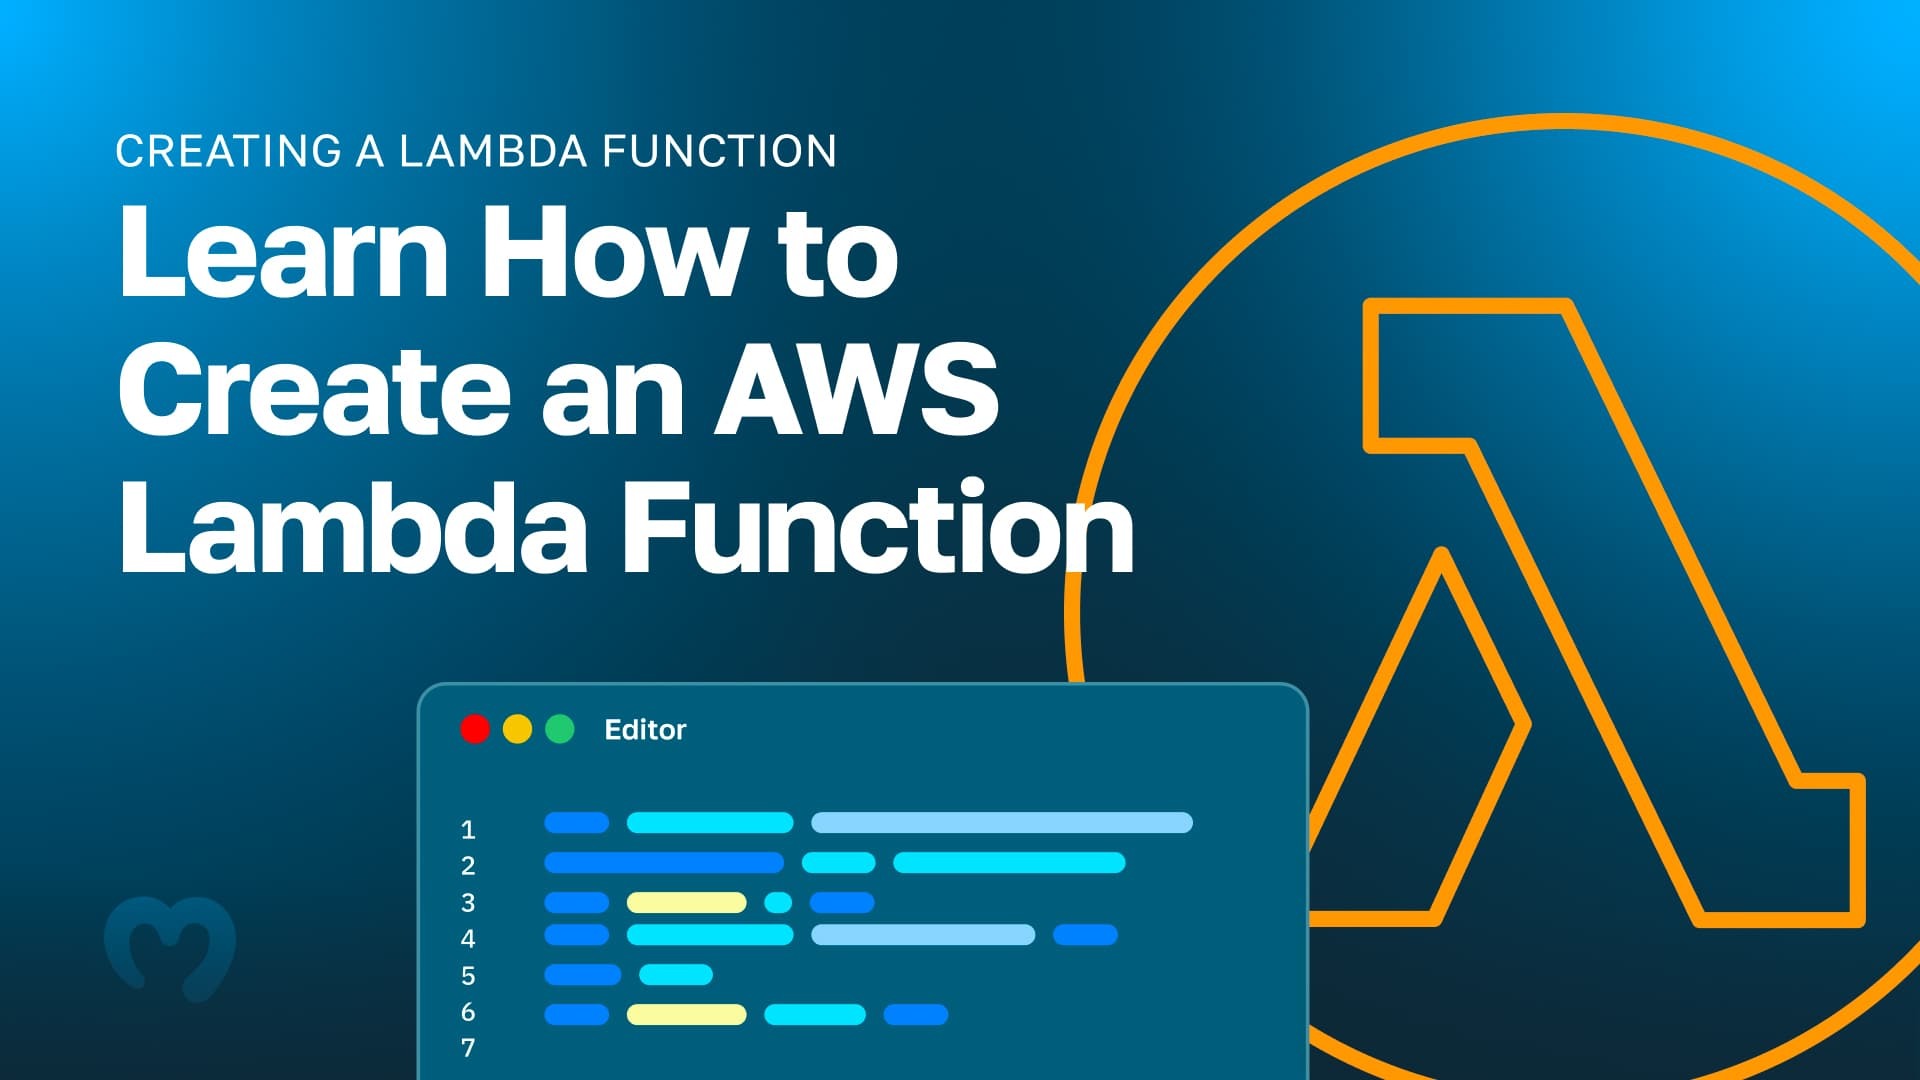 Creating a Lambda Function - Learn How to Create an AWS Lambda Function